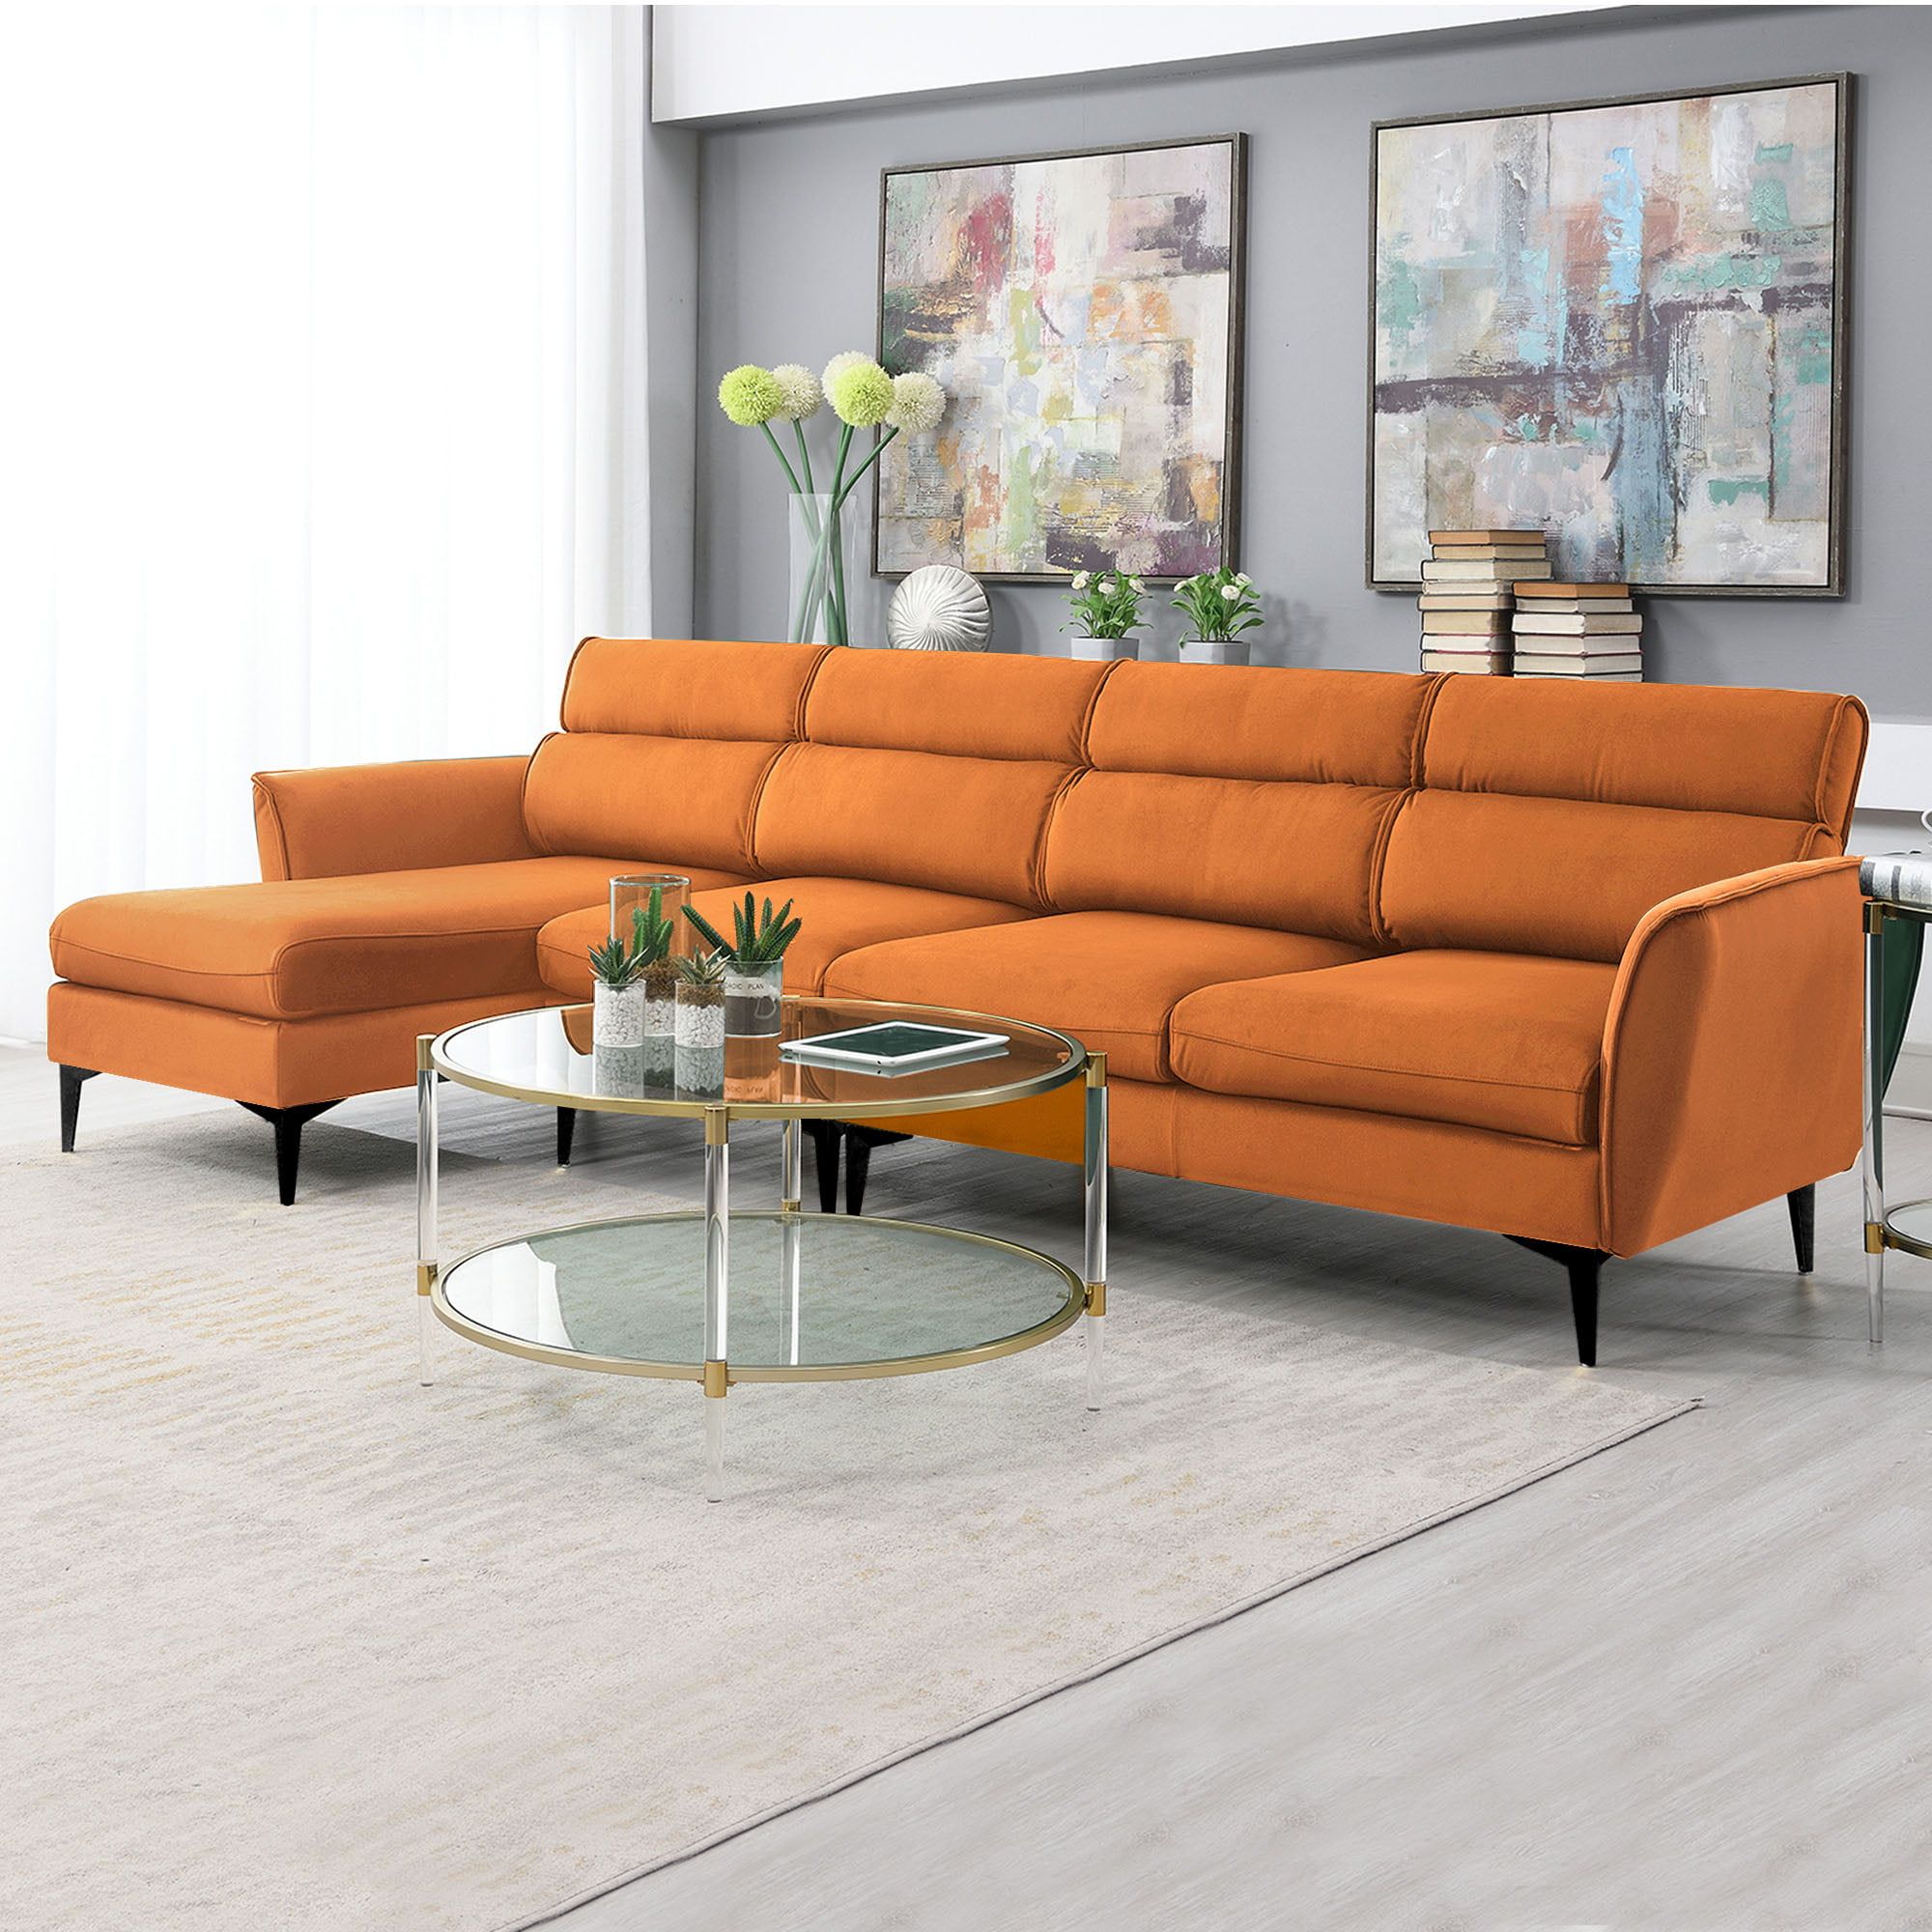 111"l Convertible Sectional Sofa Couch, Flannel L Shaped Couch With  Left/right Chaise, Modern Heavy Duty 4 Seater Sectional Couch, Kamida Sectional  Couch Furniture For Living Room, Orange – Walmart Within Heavy Duty Sectional Couches (Gallery 3 of 20)